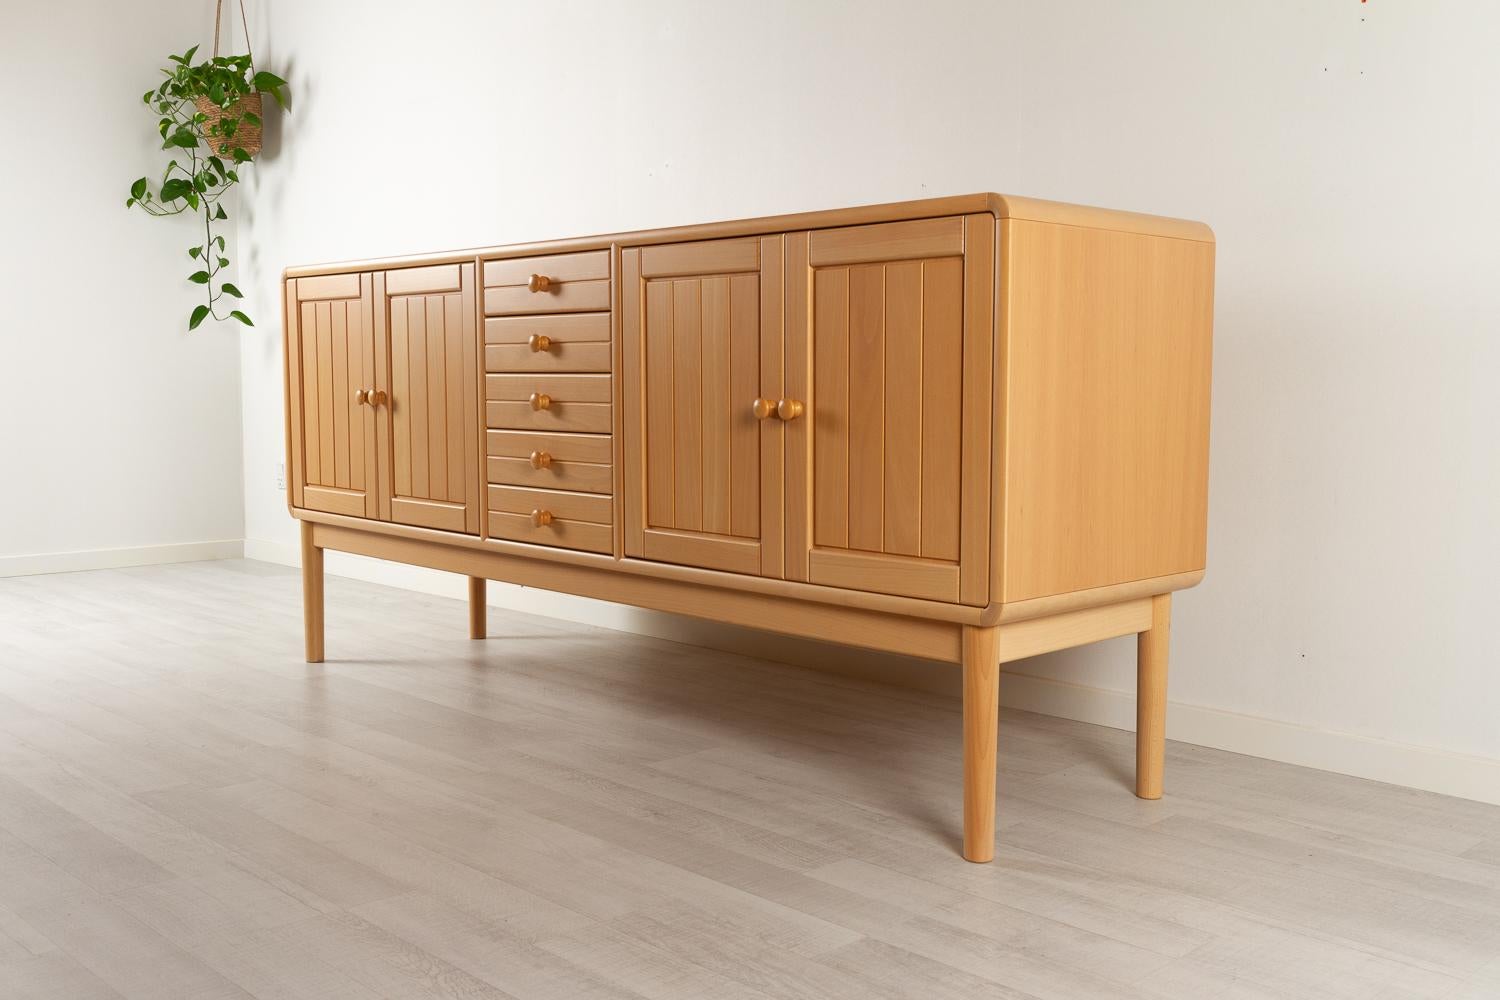 Vintage Scandinavian Modern beech sideboard by Falsig Møbelfabrik, 1980s
Long lowboard in the light nordic design. Loads of storage space in the two cabinets and five drawers. The body has rounded corners in light blond solid beech, and the double